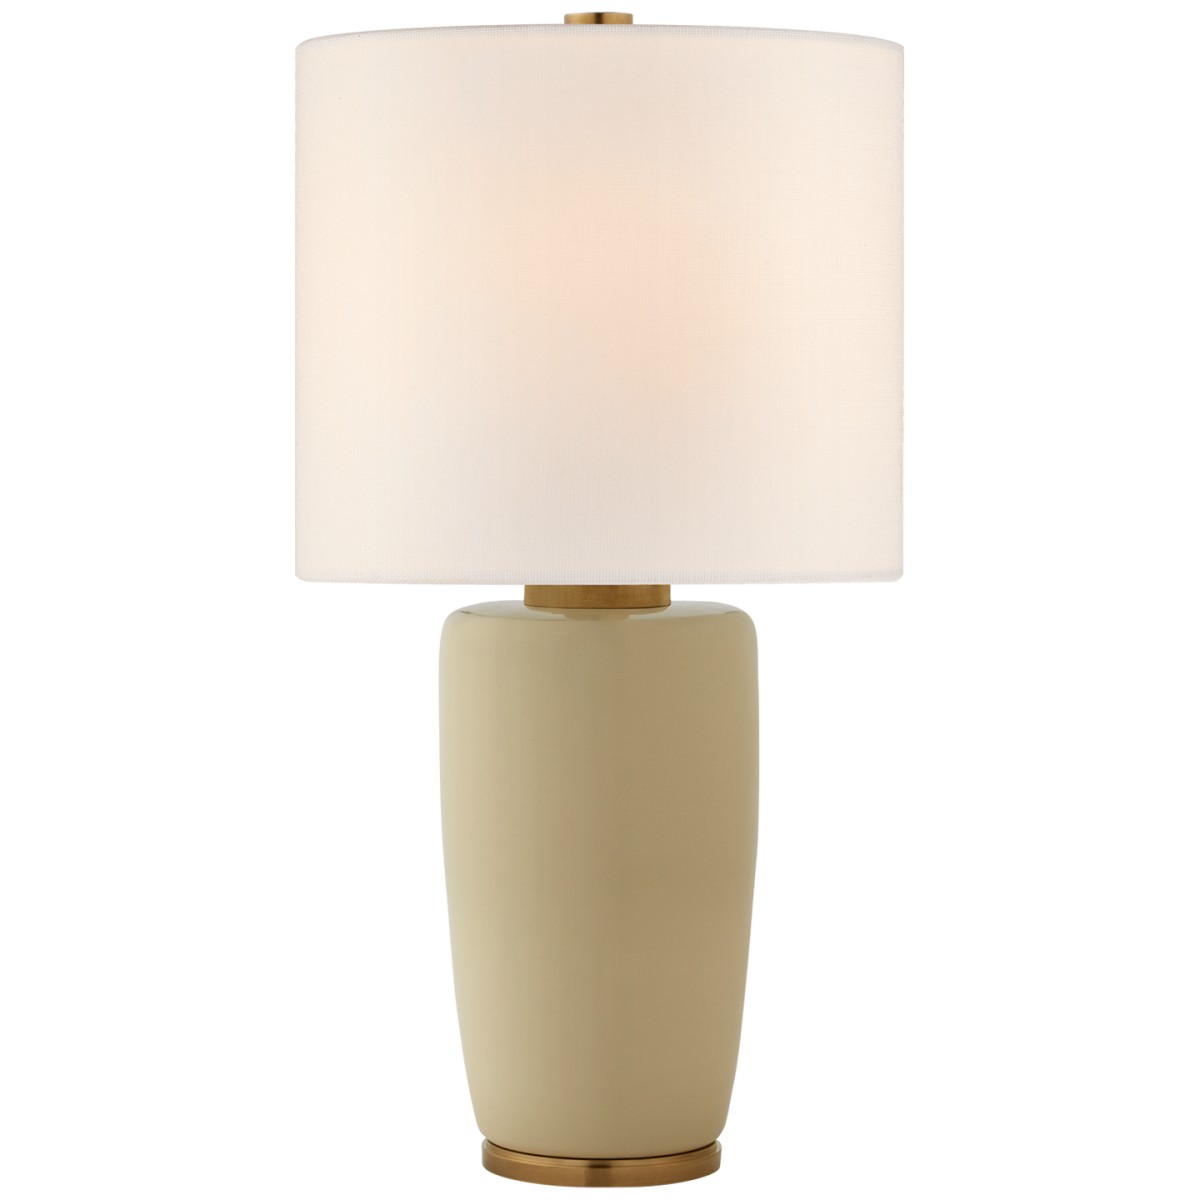 Chado Large Table Lamp with Linen Shade